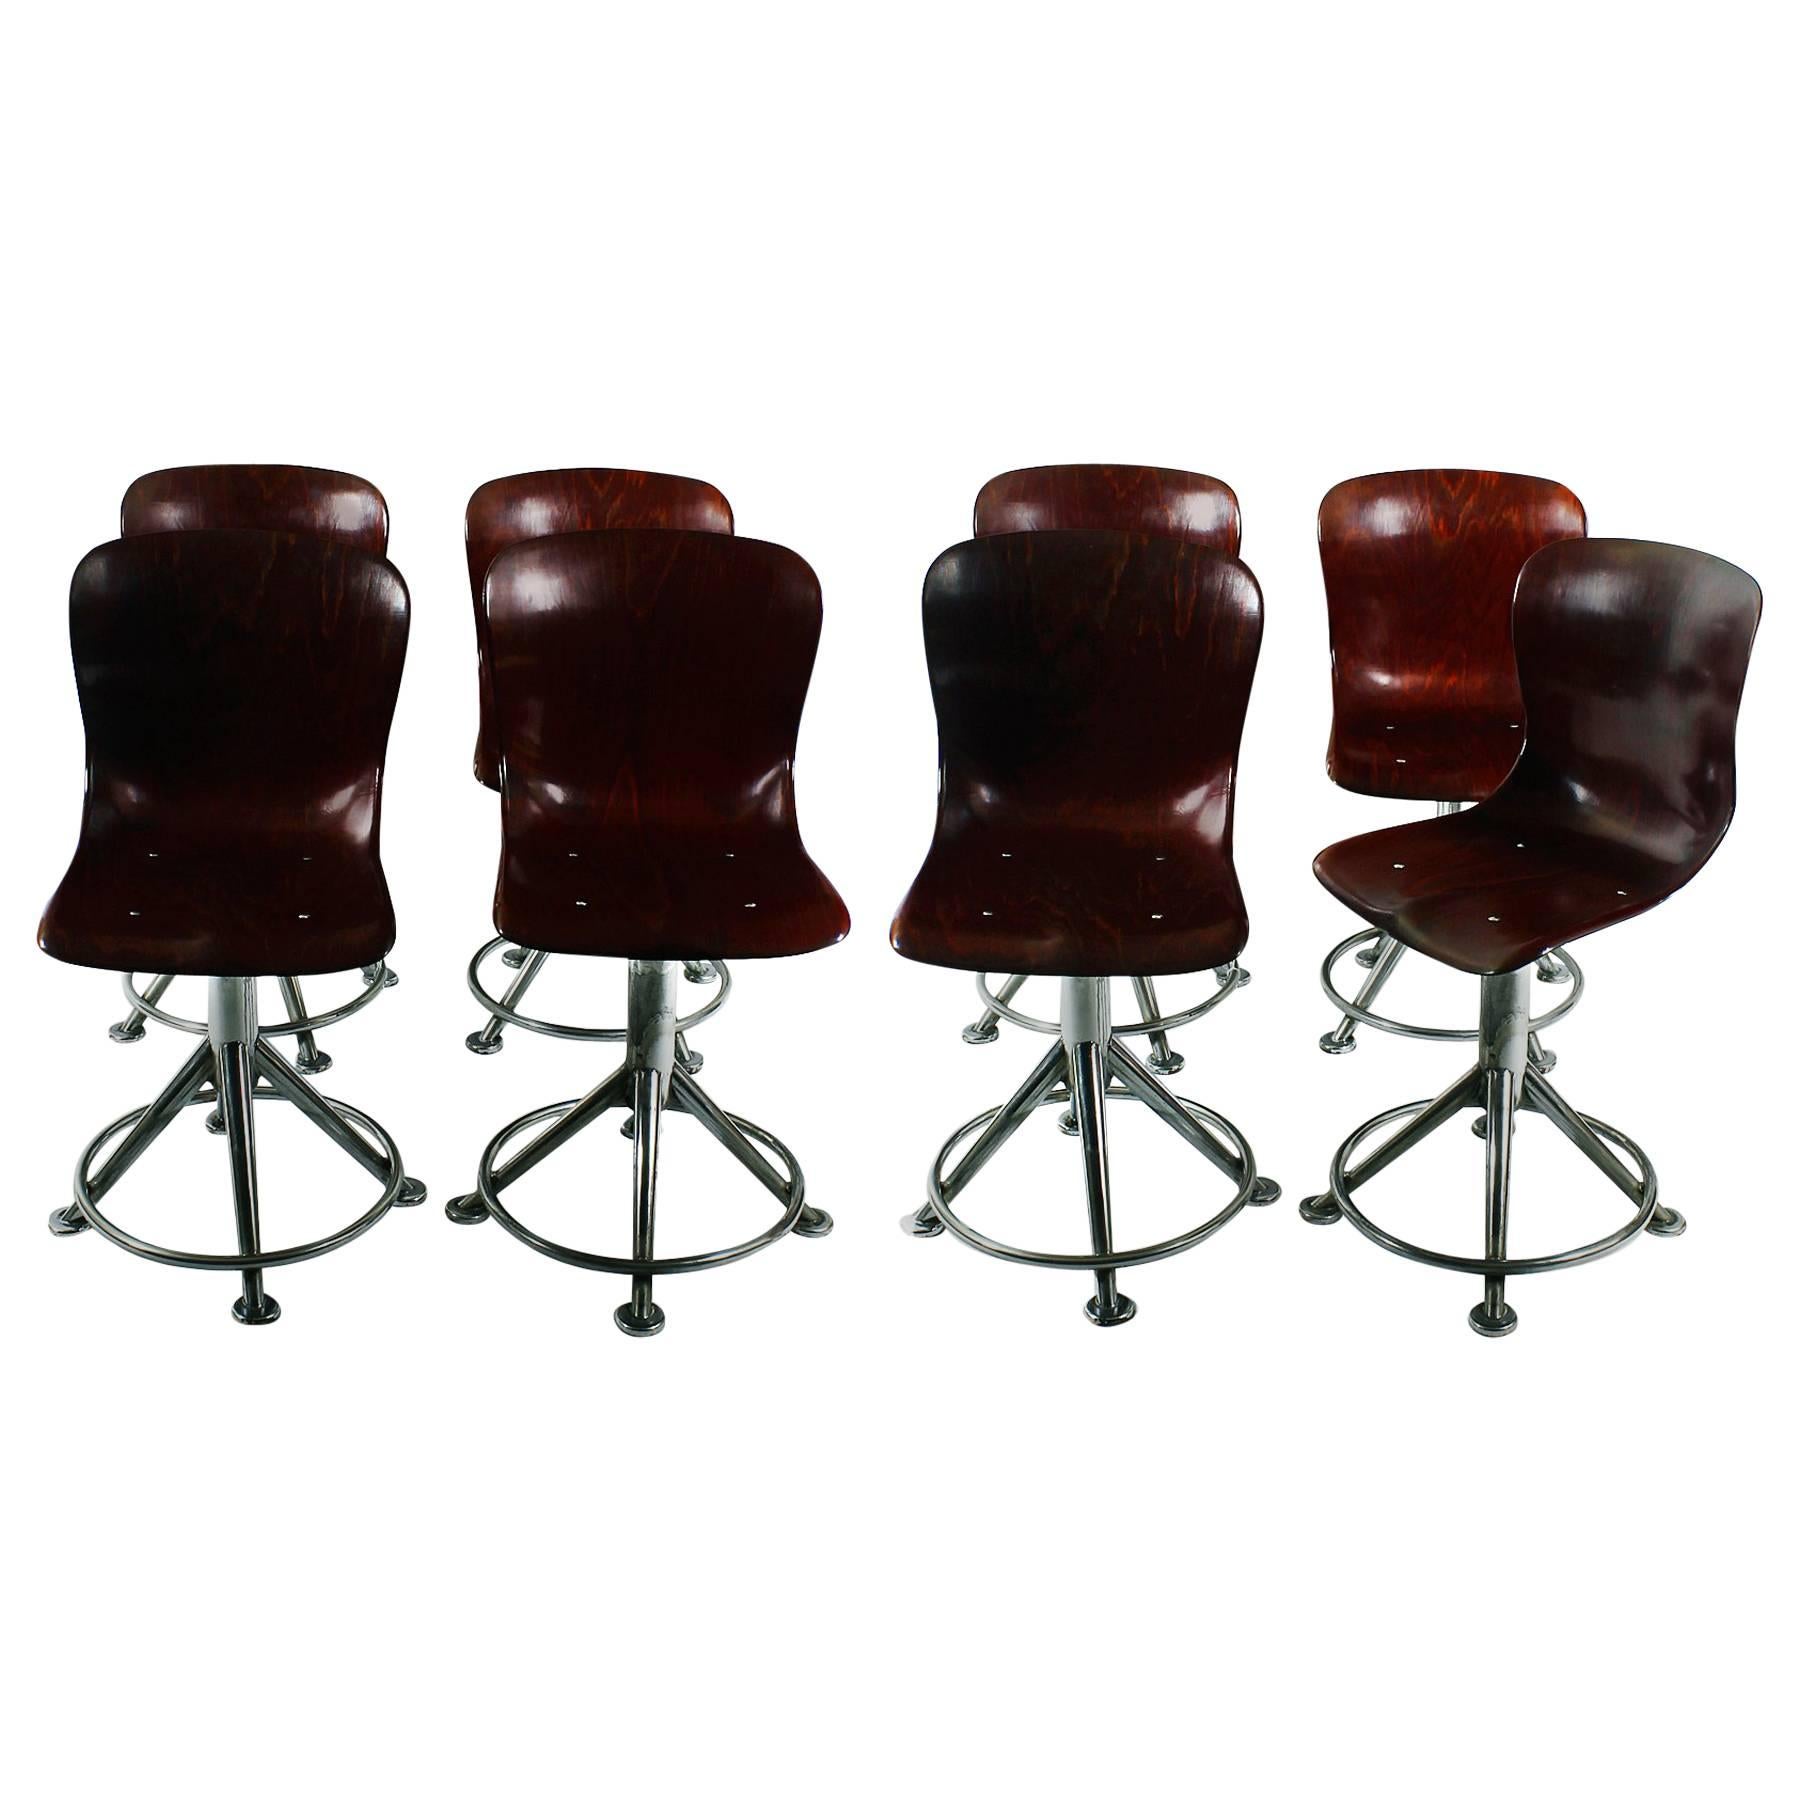 1960s Set of Eight "Pagotz" Swiveling Chairs, Team Microtecnica Fiat. Italy